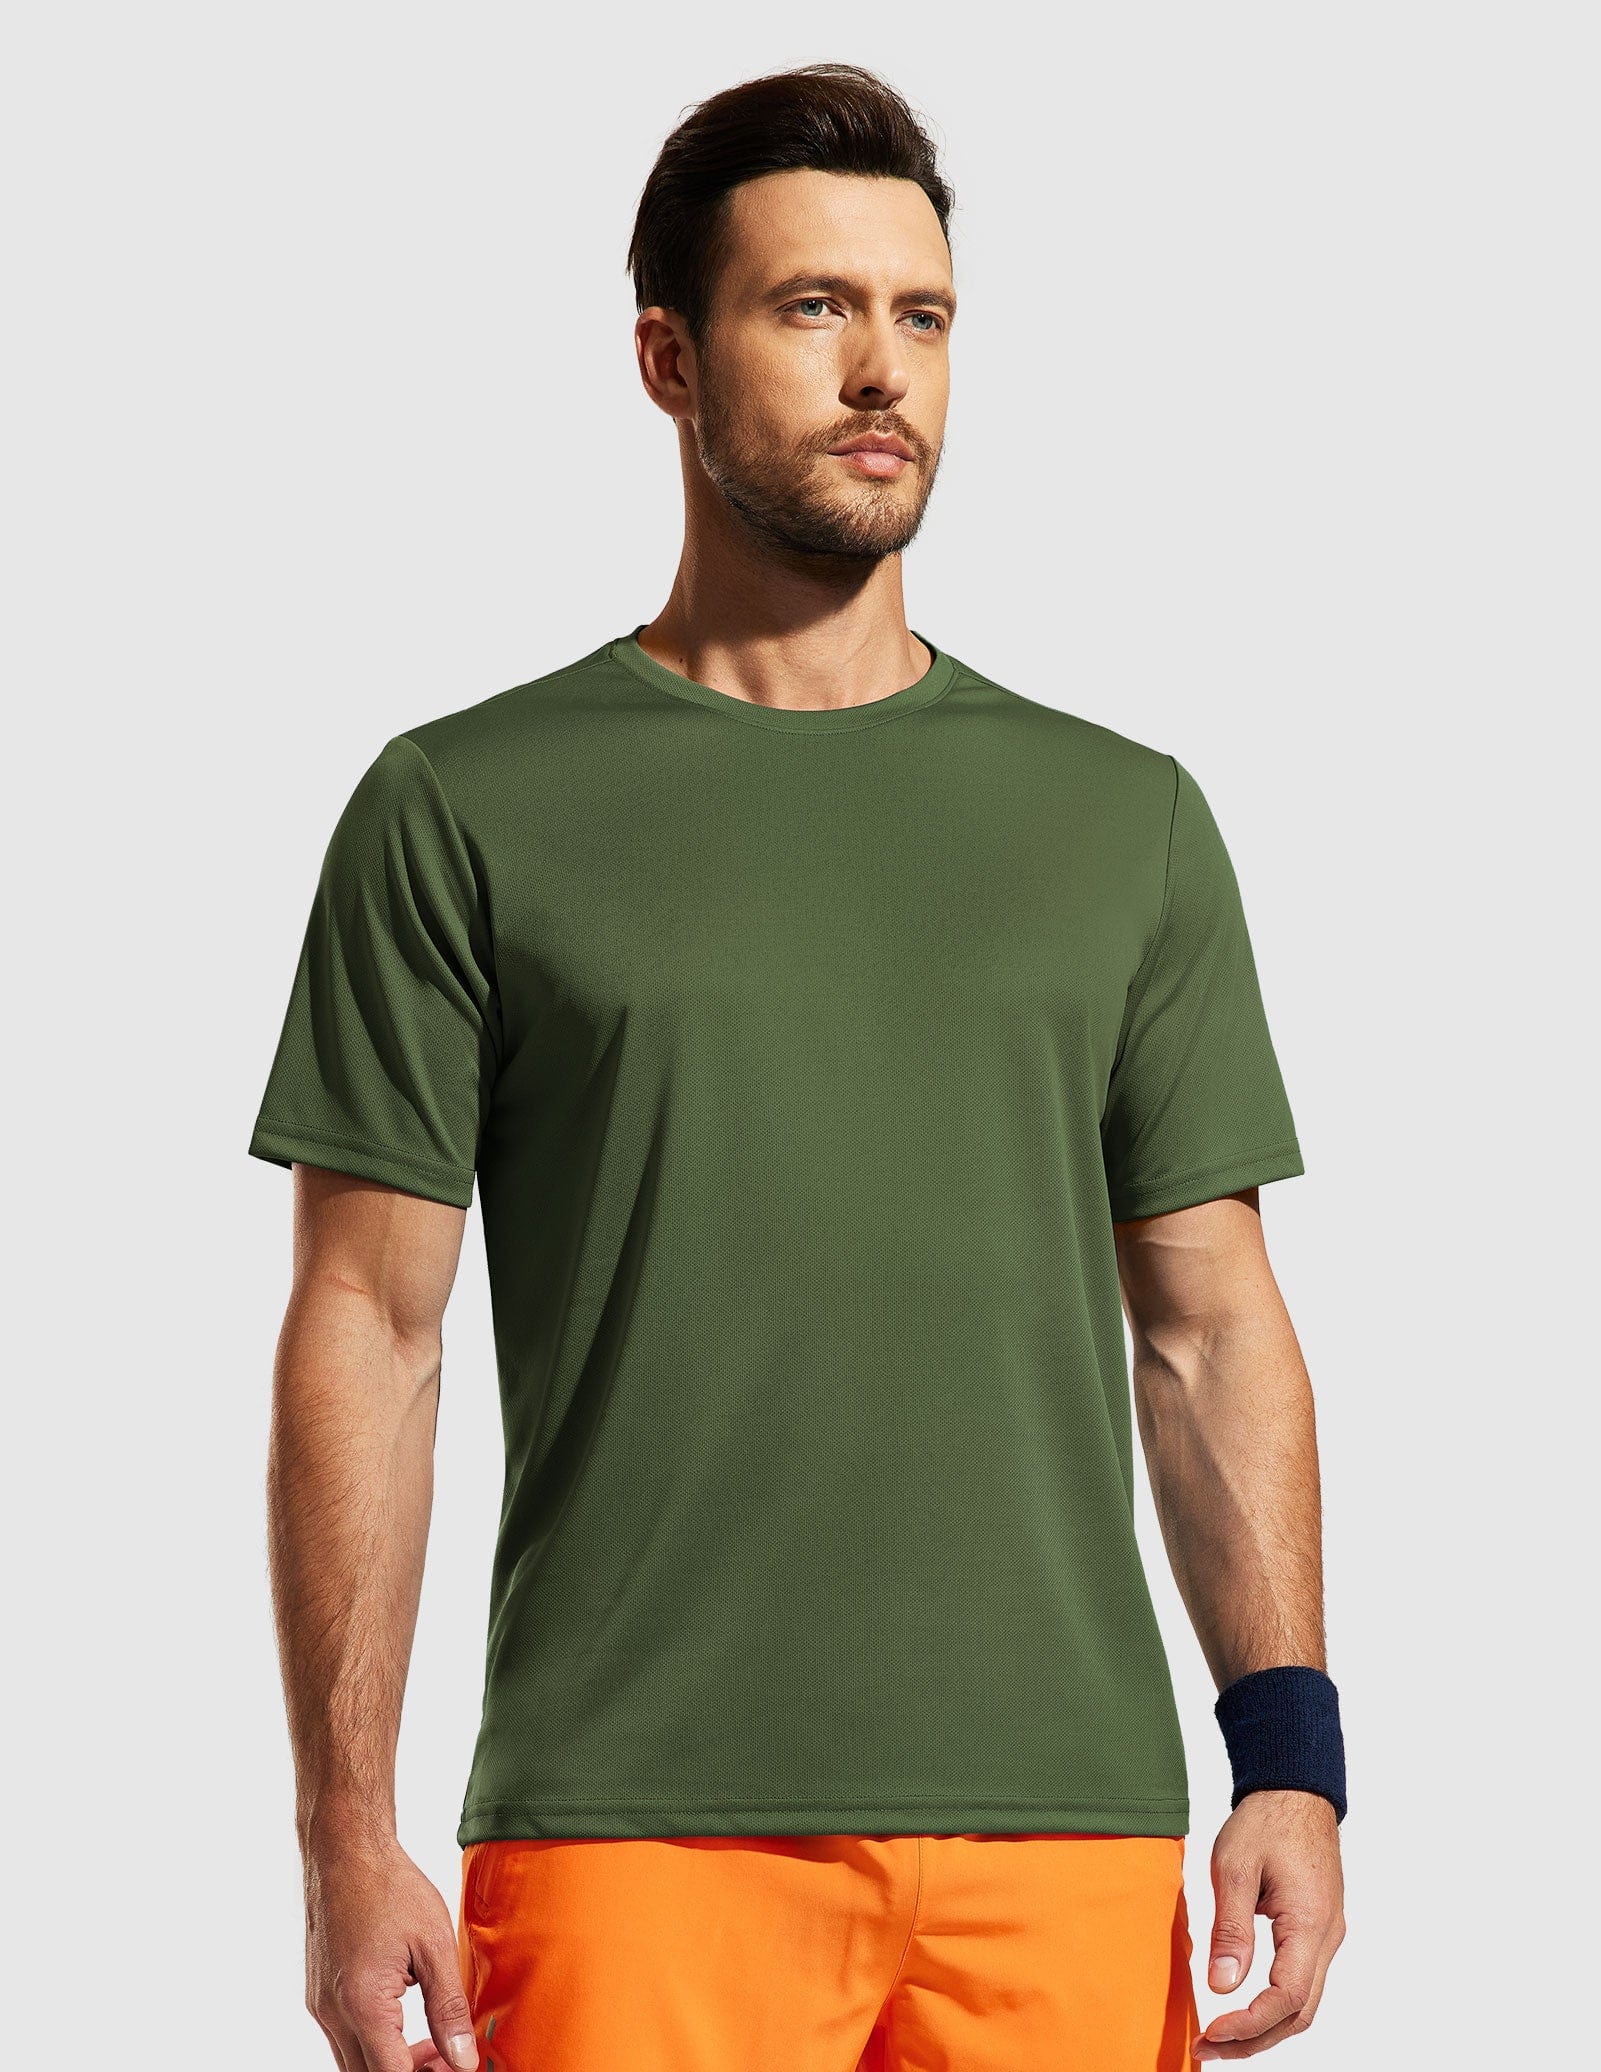 Men's Dry Fit Workout T-shirts for Gym Athletic Running Men Shirts Army Green / S MIER